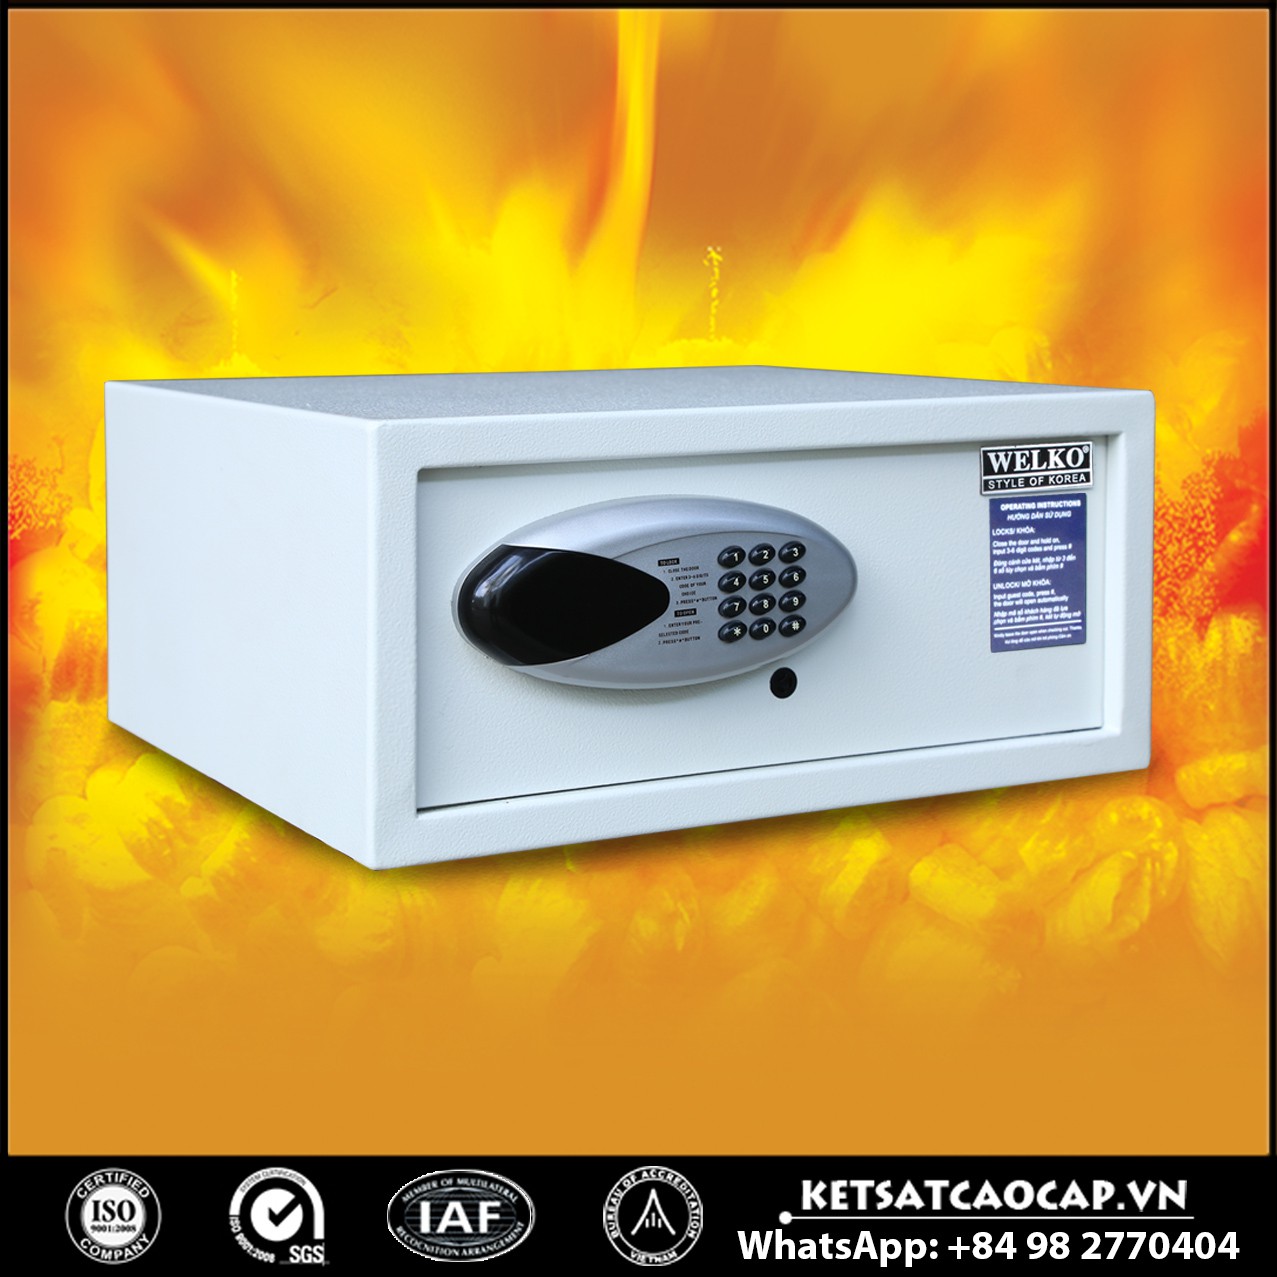 Hotel Safe Dimensions Manufacturers